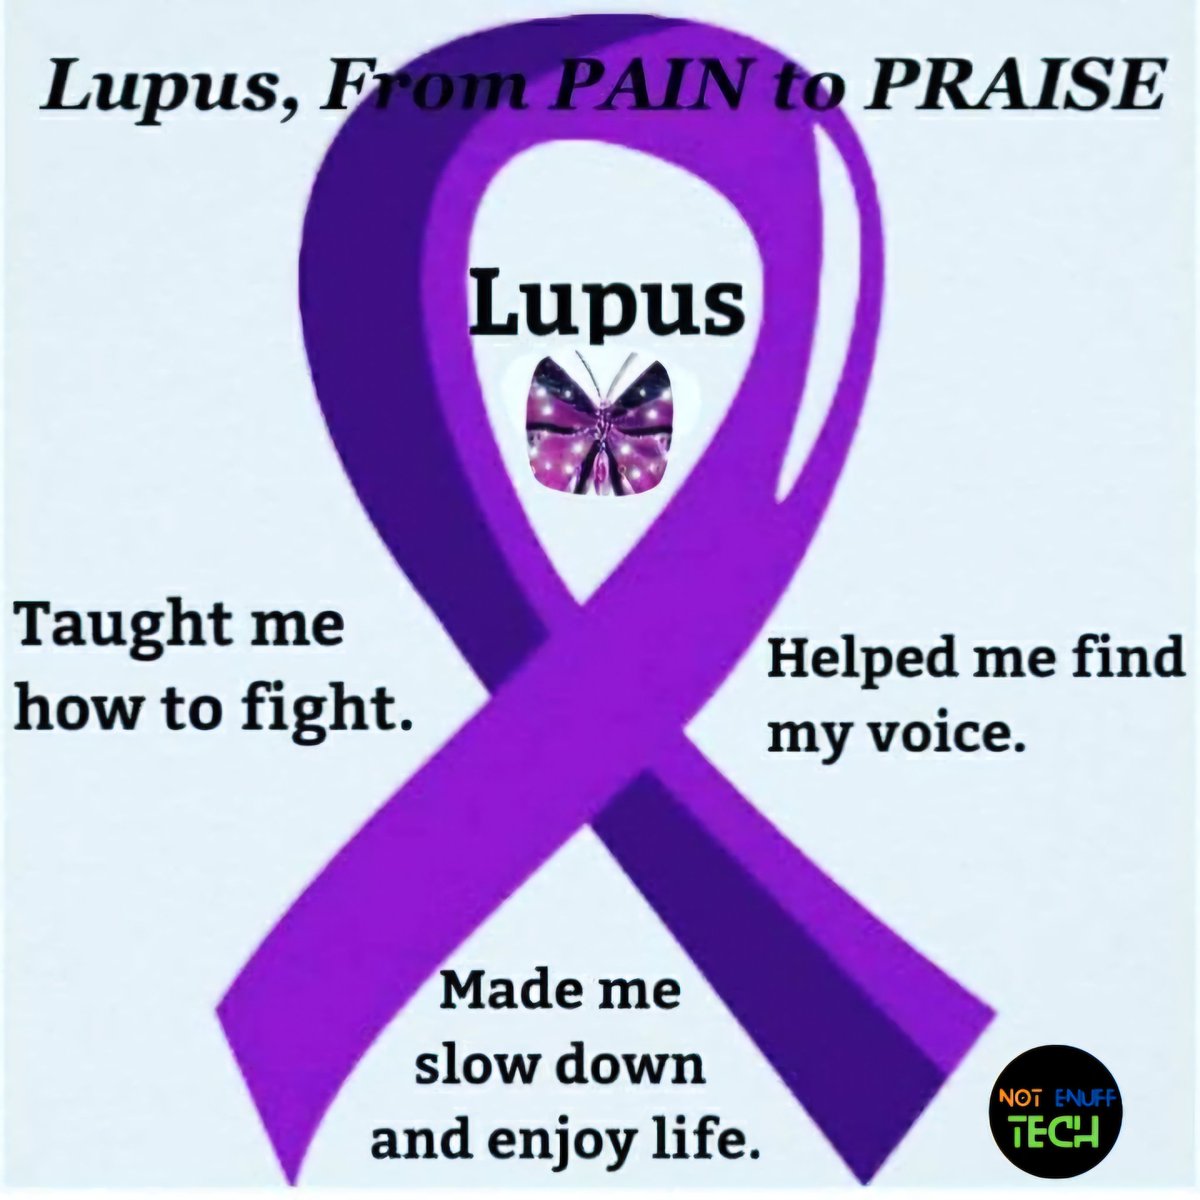 🗣💜🦋 Fighting for the #lupus cure starts with learning more about the #disease Raise your awareness 🙌💜📚💜 #educate yourself Everyday 🦋💜 Nobody can take away your pain, but don't let lupus takeaway your happiness 🙏🙋🏽‍♂️🙋‍♀️ Let's Band together to raise awareness 💜🦋